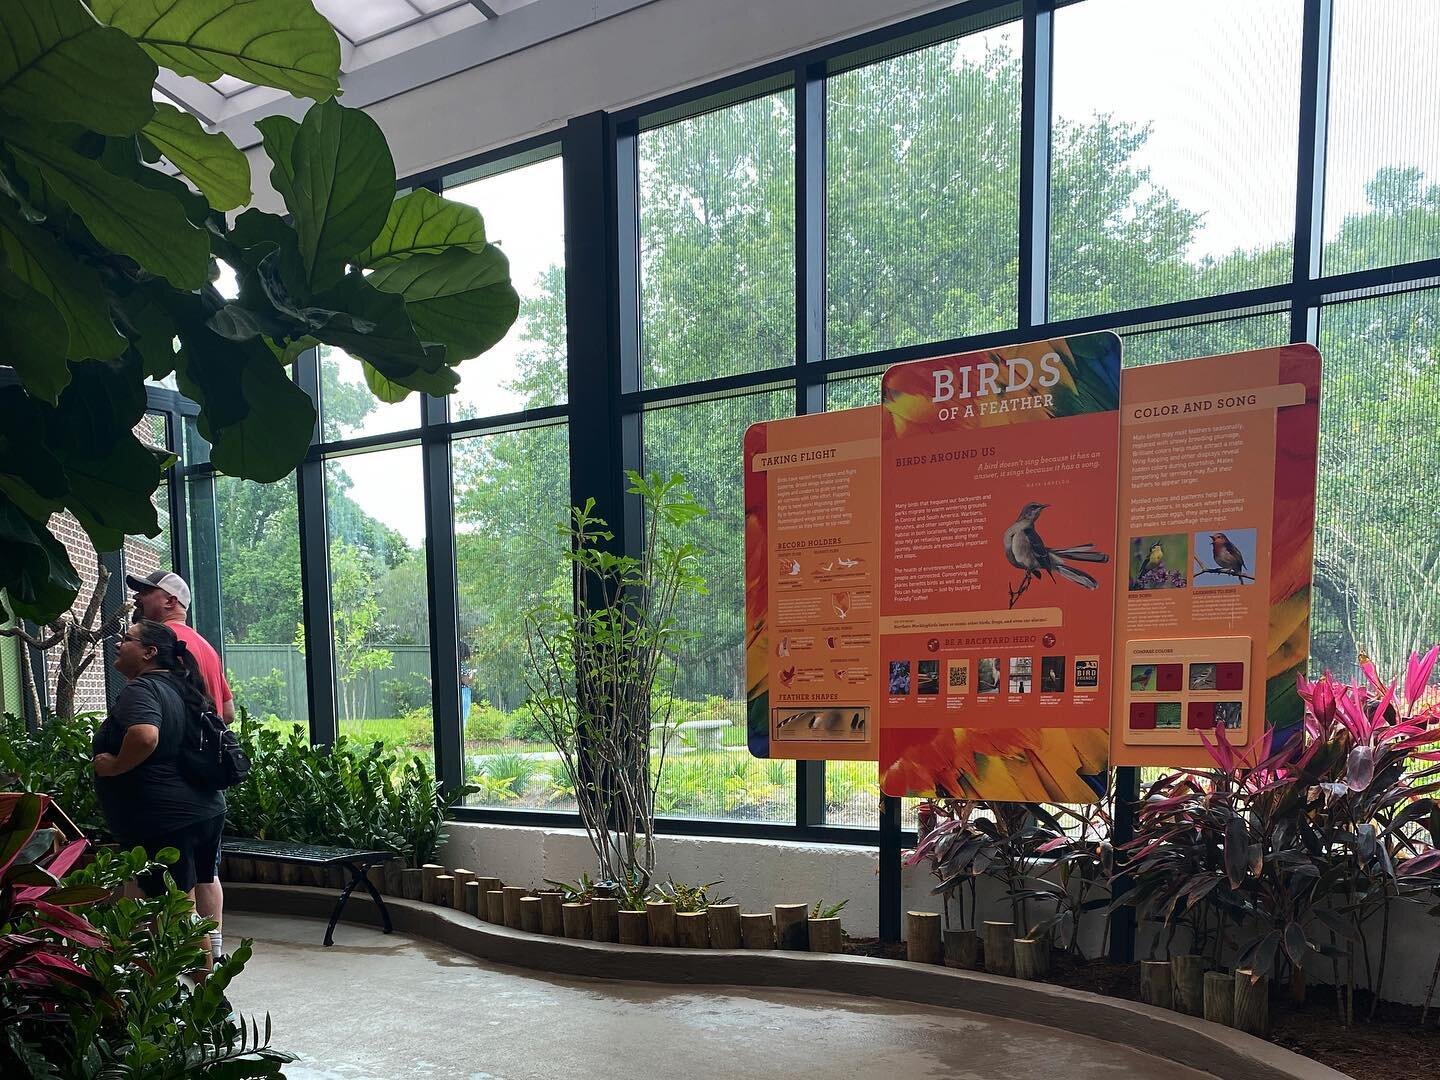 Ready to fly into the weekend like the Toco Toucan at the new Wings of the World exhibit at Audubon Zoo in New Orleans, Louisiana! What are your weekend plans?
&mdash;
Content: Terry O&rsquo;Connor &amp; Jamie Creola
Fabrication: @opasigns